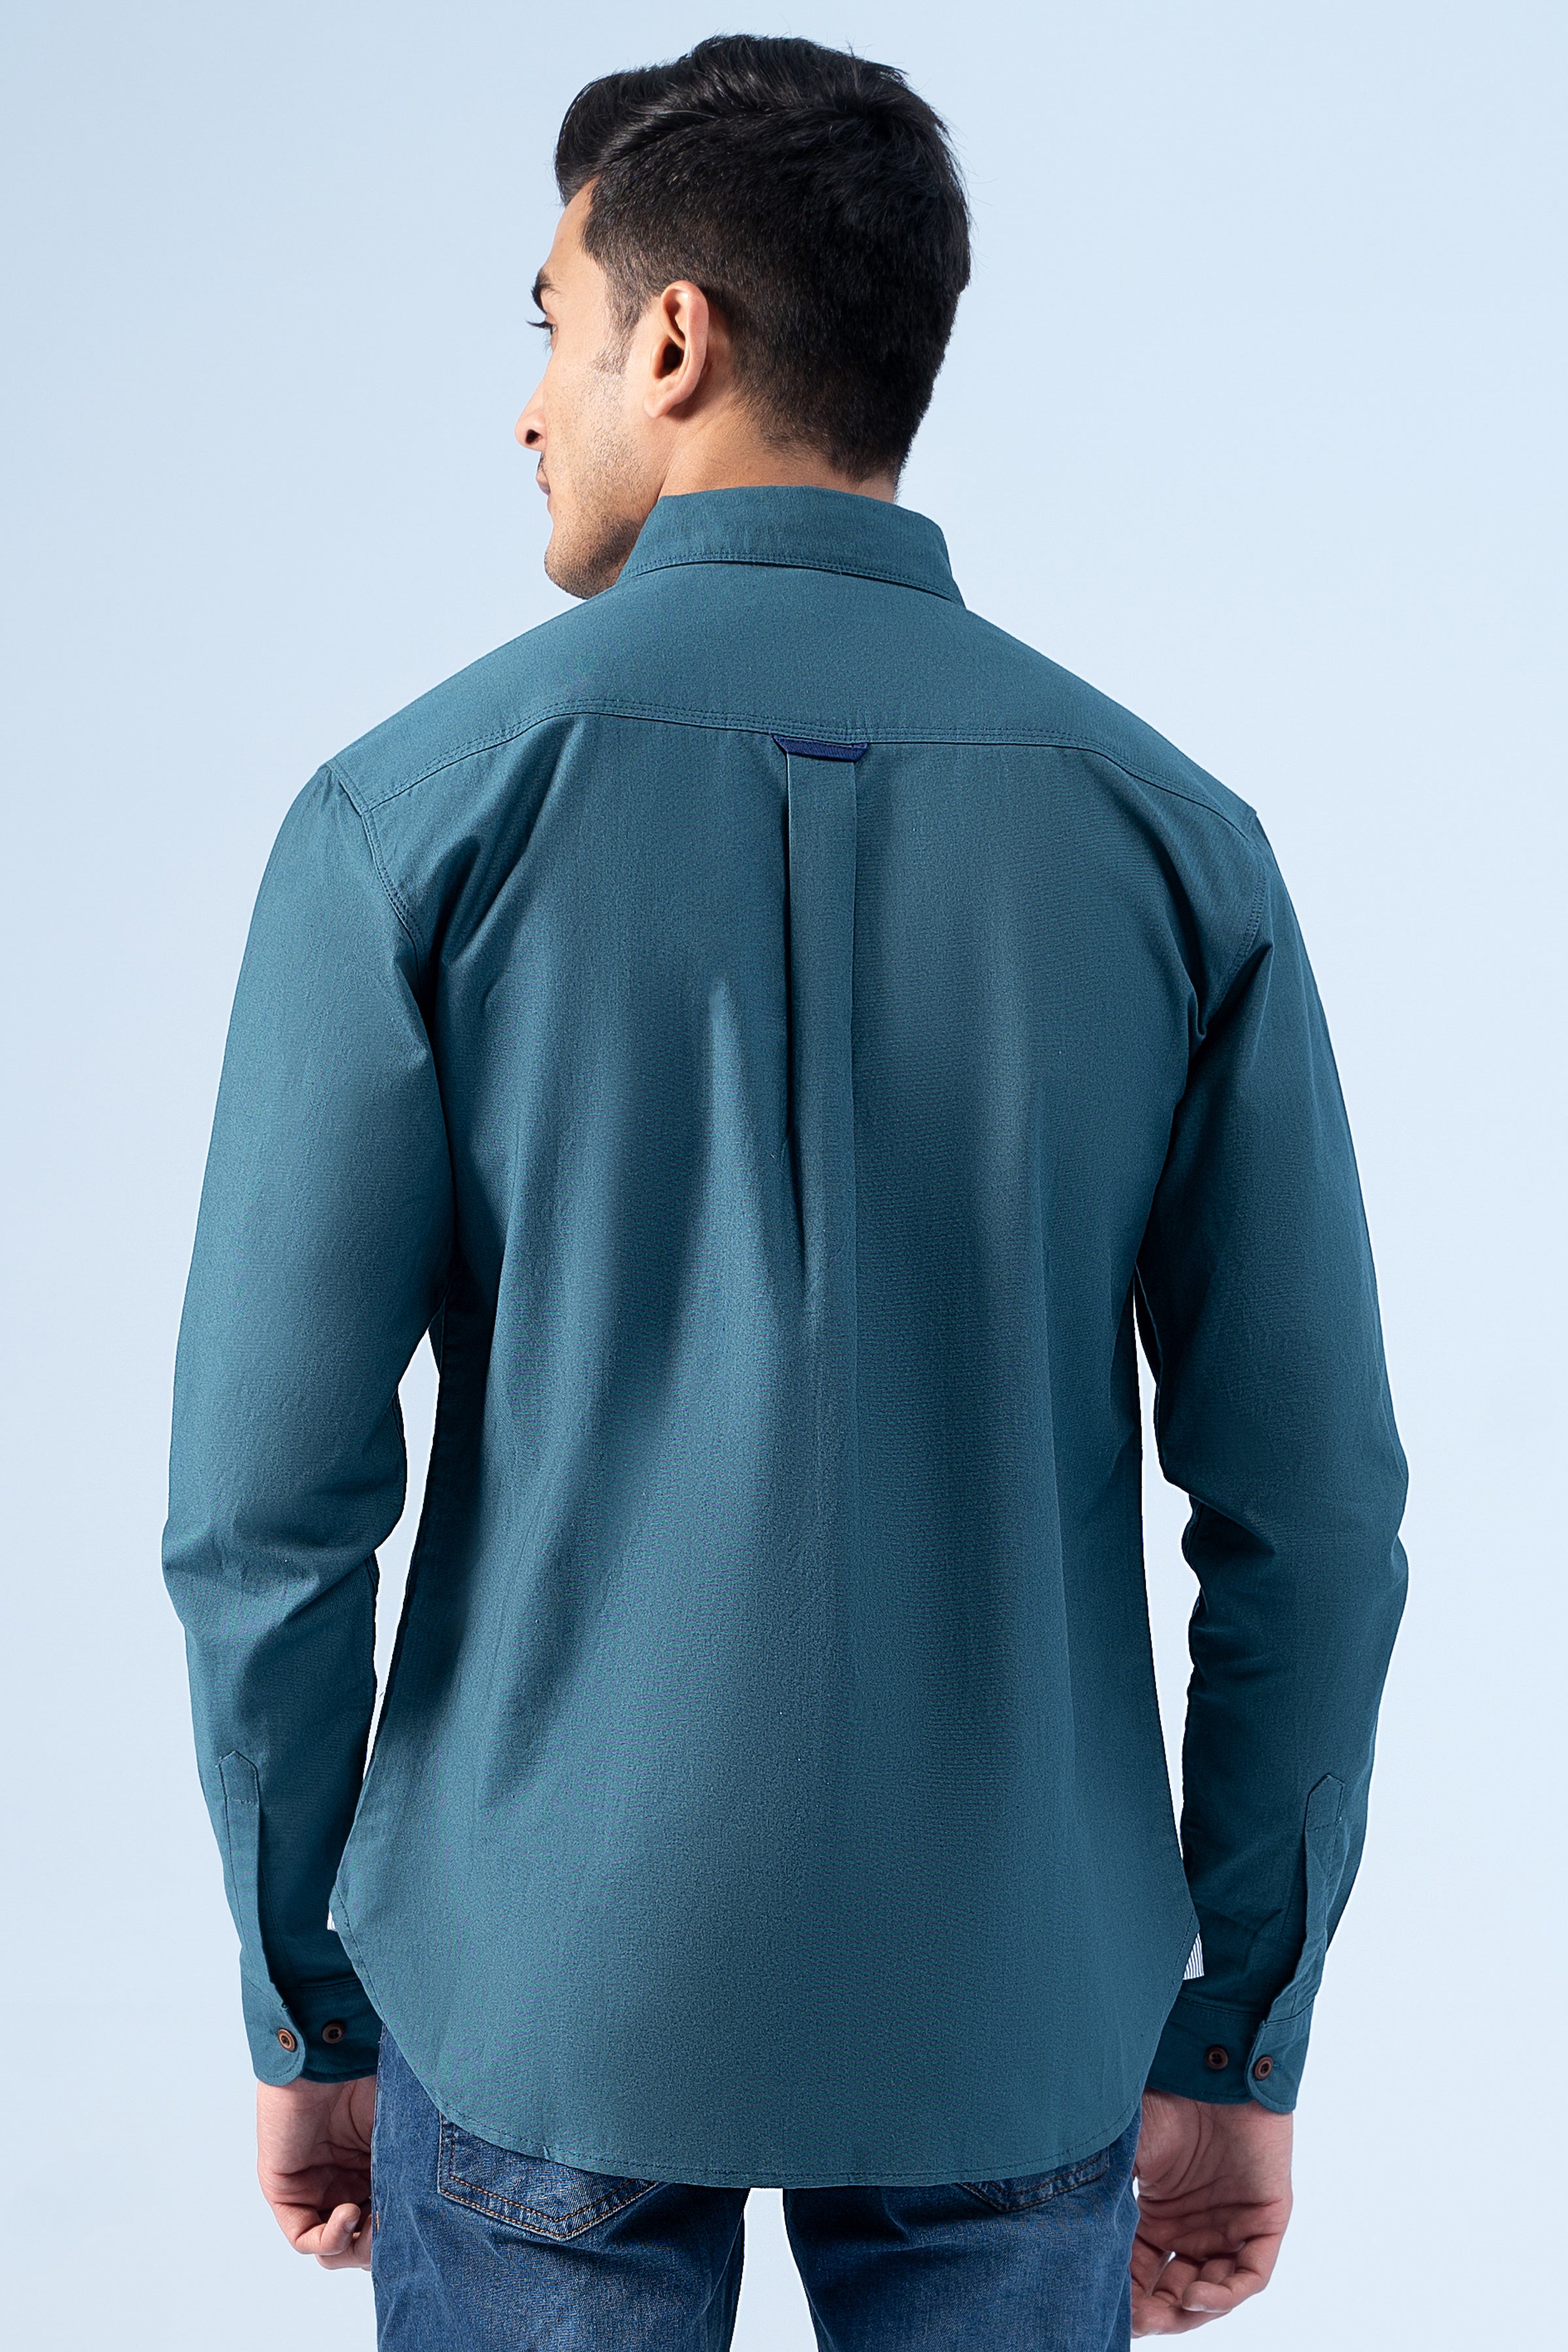 CASUAL SHIRT TEAL - Charcoal Clothing